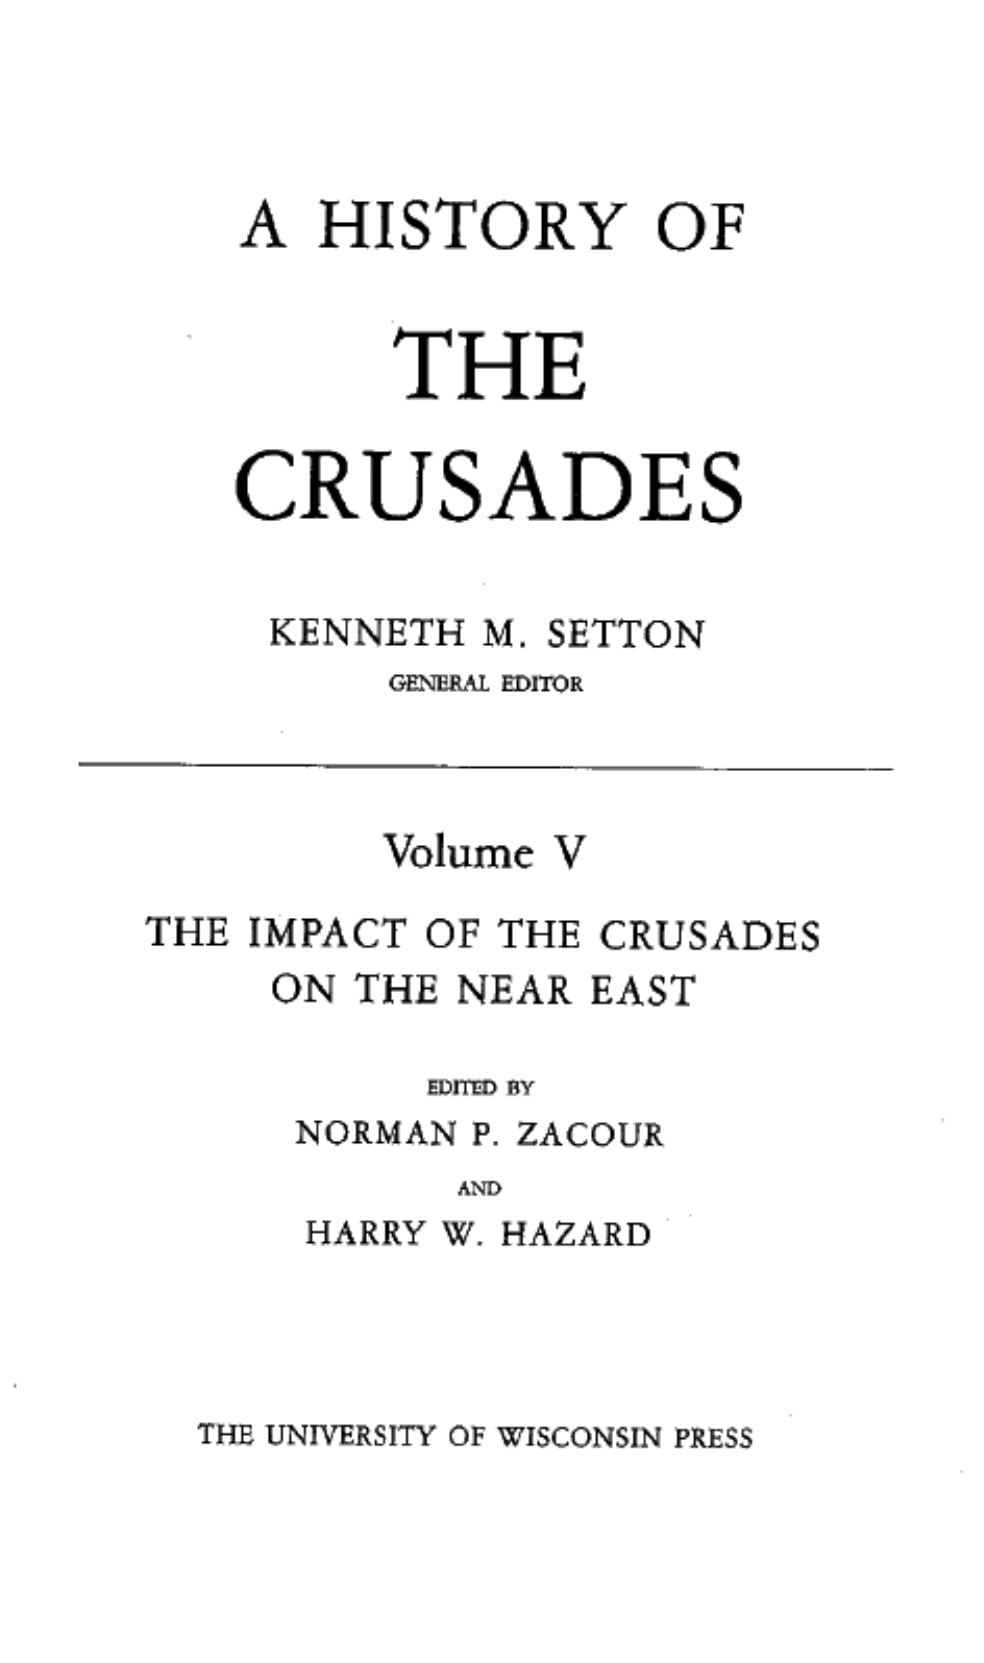 A History of the Crusades, Vol. V; The Impact of the Crusades on the Near East